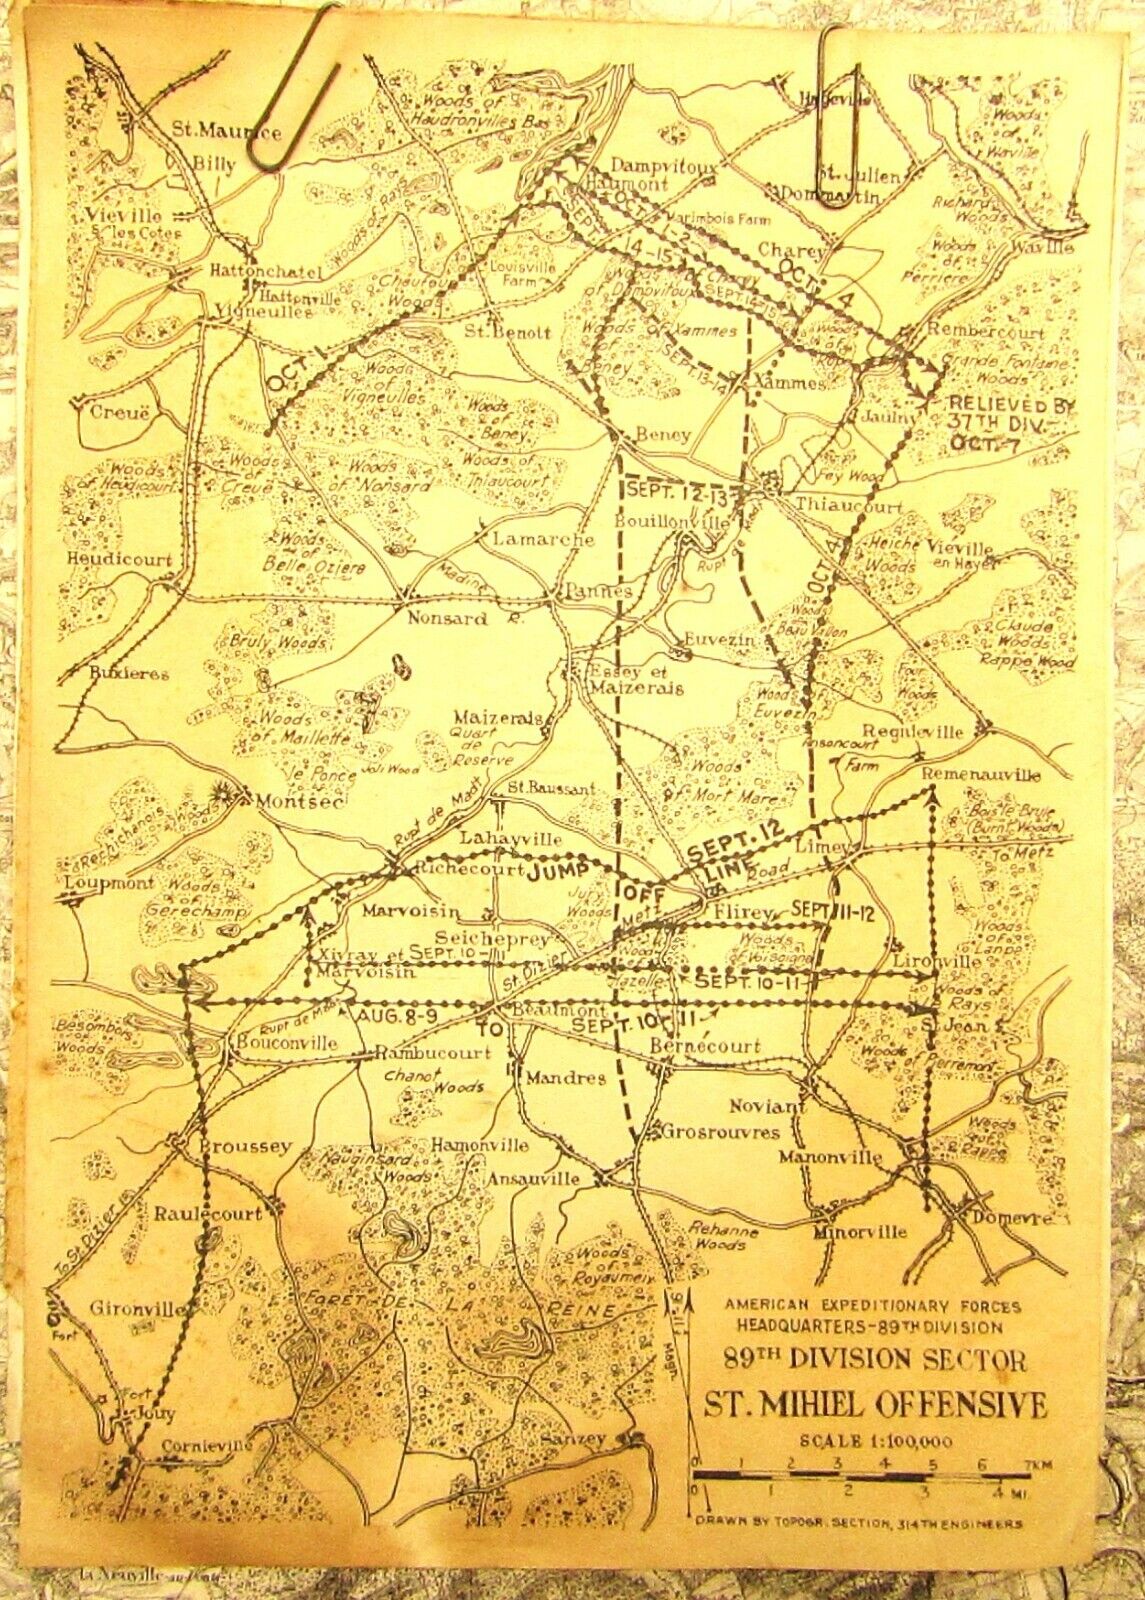 Vintage War Use Map St. Mihiel Offensive Trech Lines Jump Line Orders for Leave